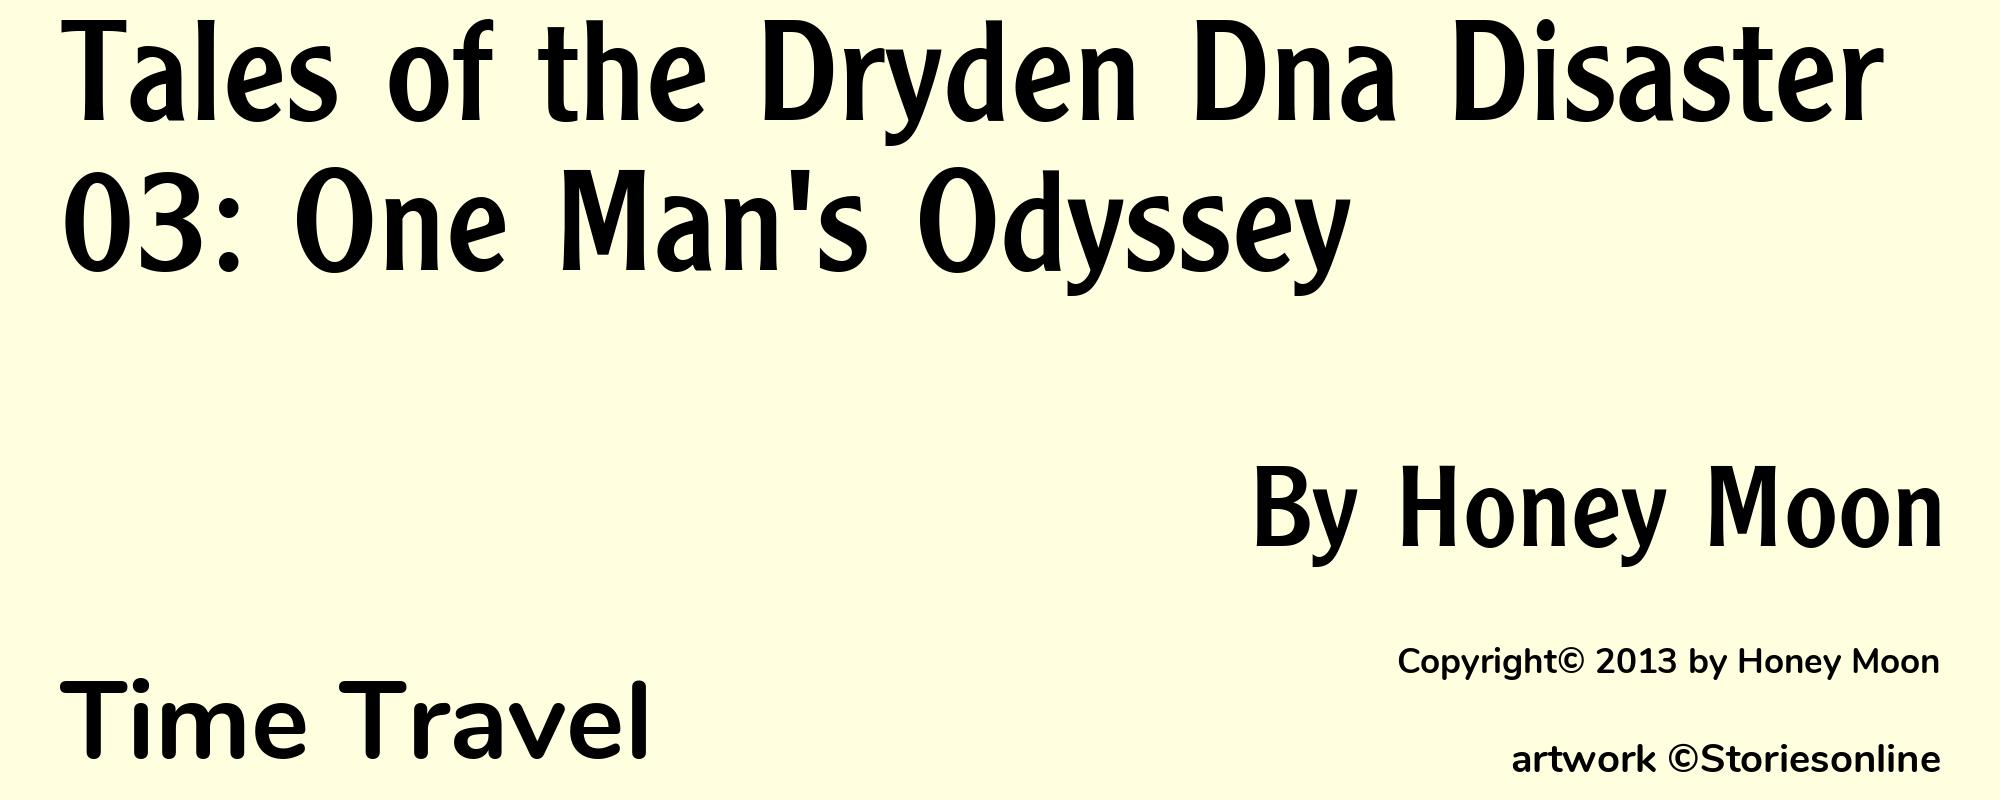 Tales of the Dryden Dna Disaster 03: One Man's Odyssey - Cover